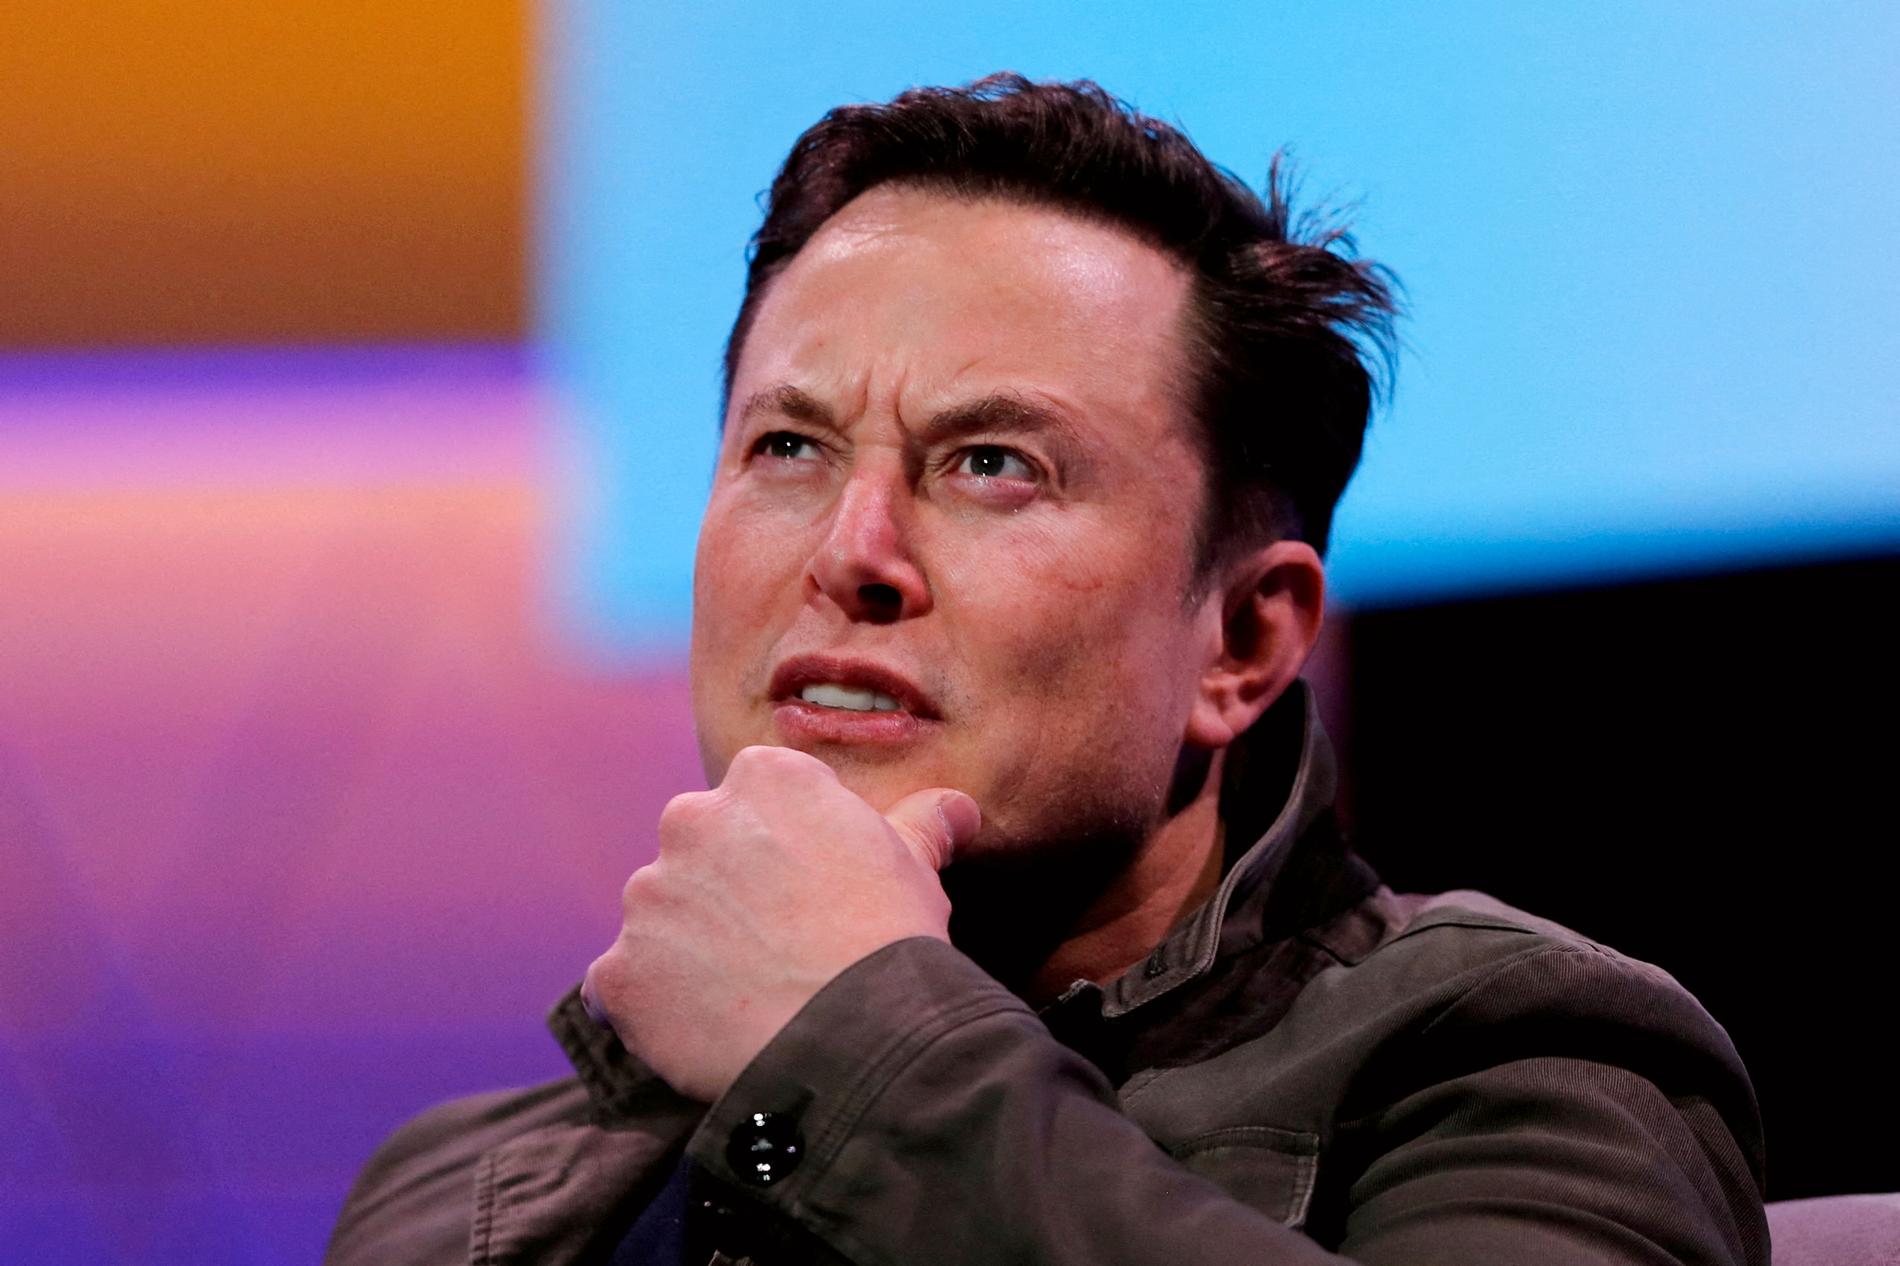 Musk rages after Tesla was kicked out of the ESG - E24